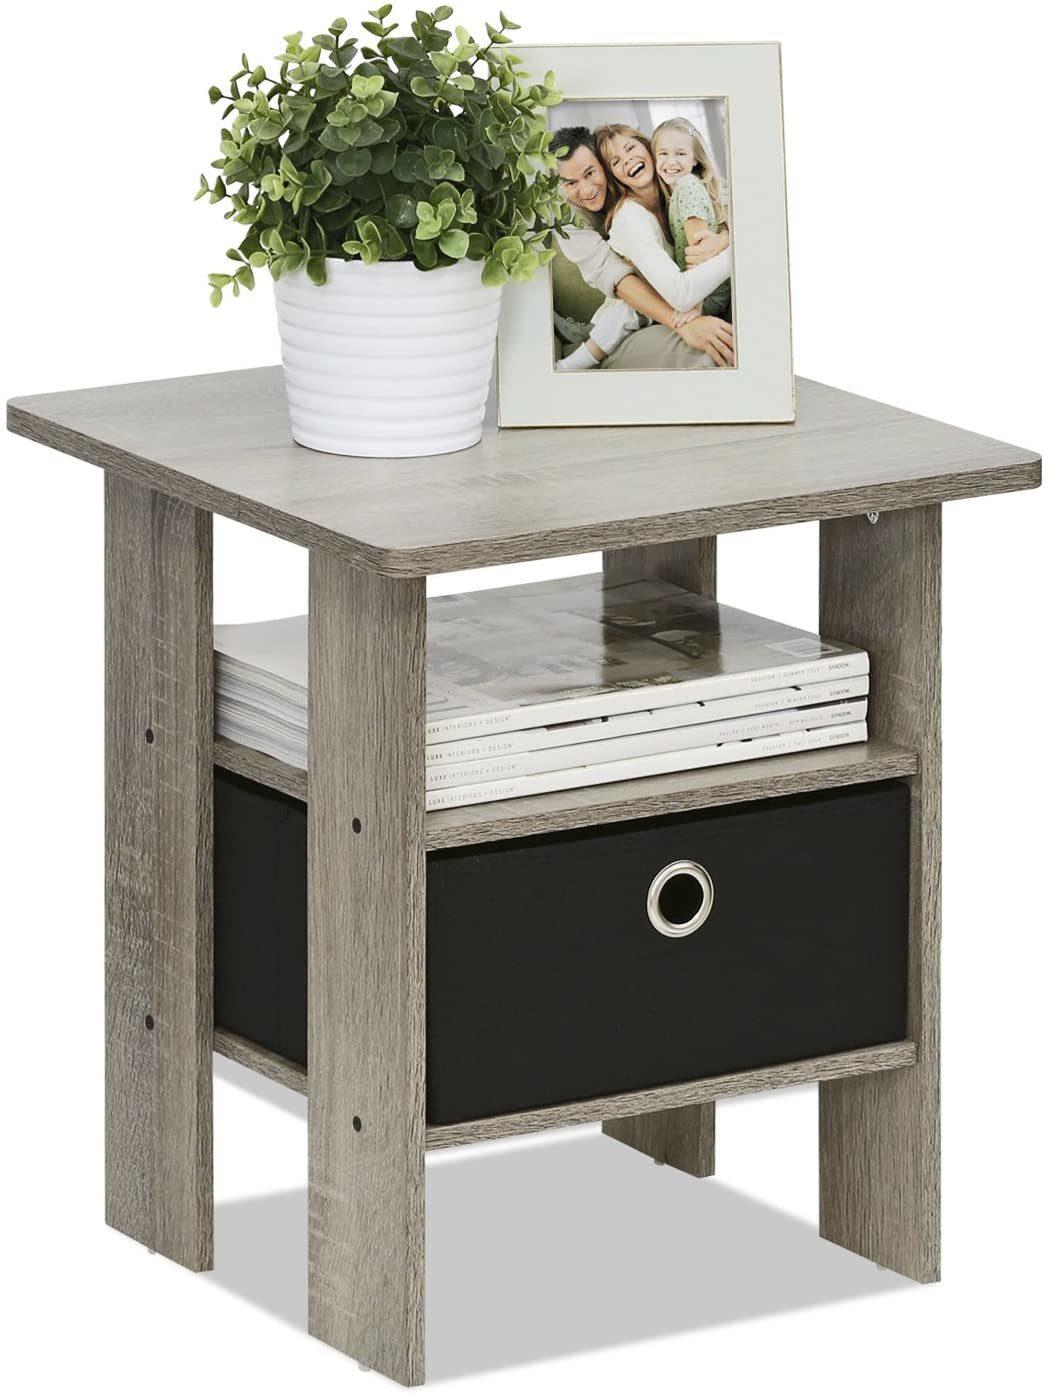 French Oak Grey Simple Style End Table Nightstand with Bin Drawer